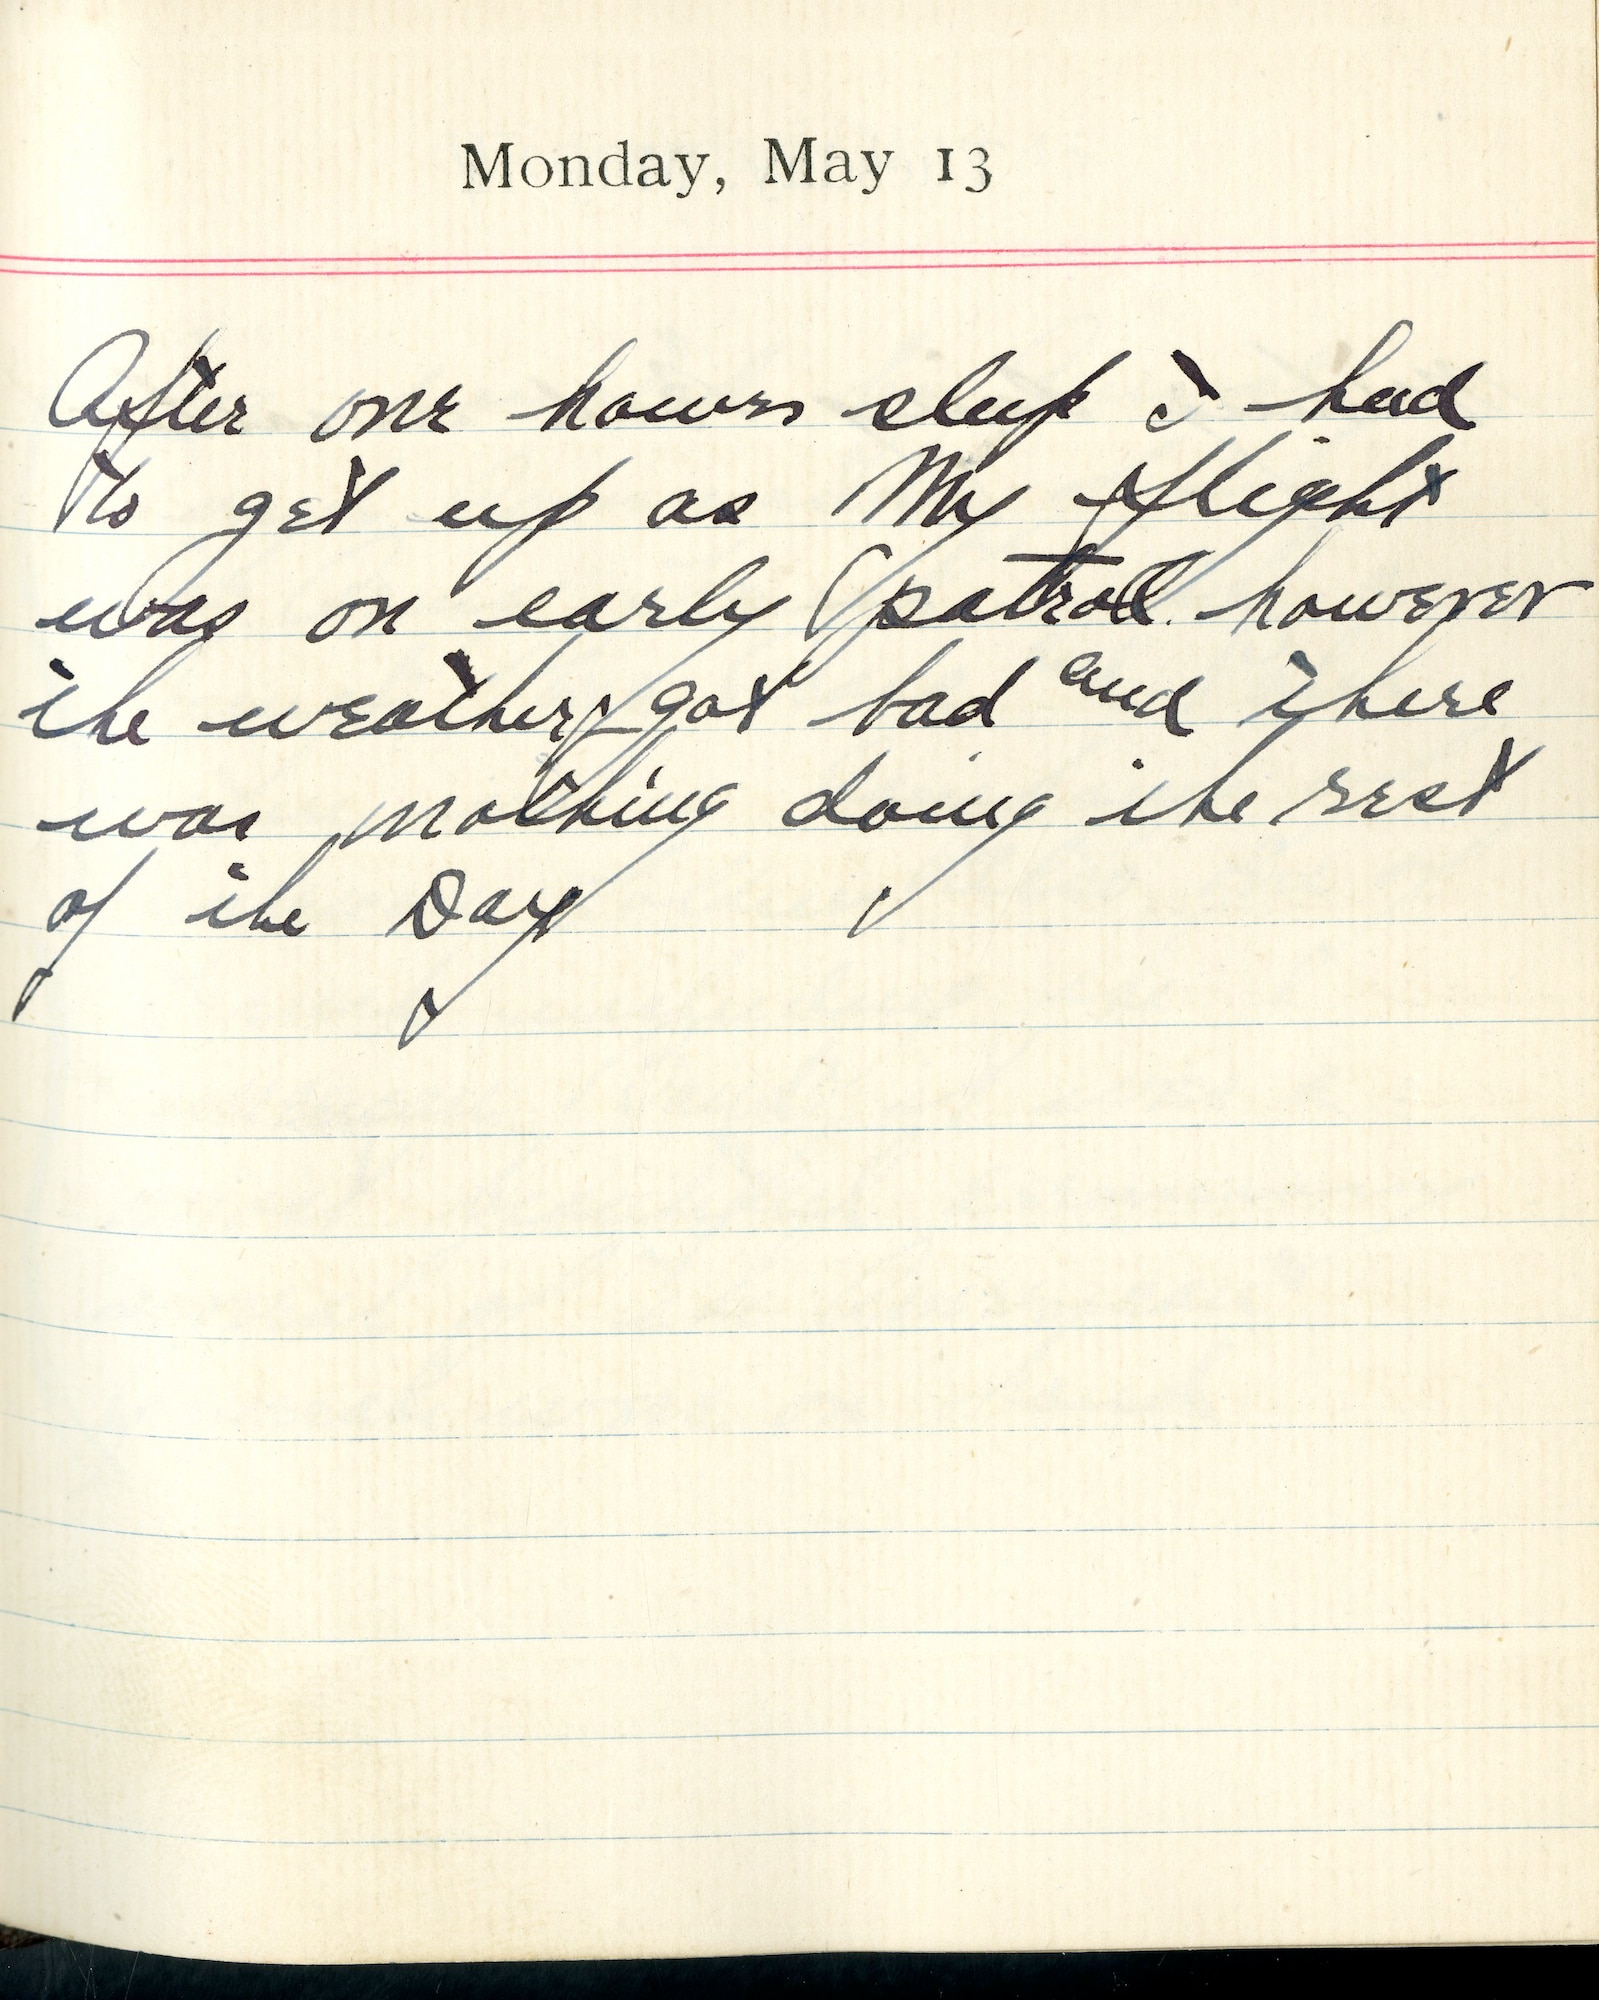 Capt. Edward V. Rickenbacker's 1918 wartime diary entry. (05/13/1918).

After one hours sleep, I had to get up as my flight was on early patrol.  However the weather got bad and there was nothing doing the rest of the day.